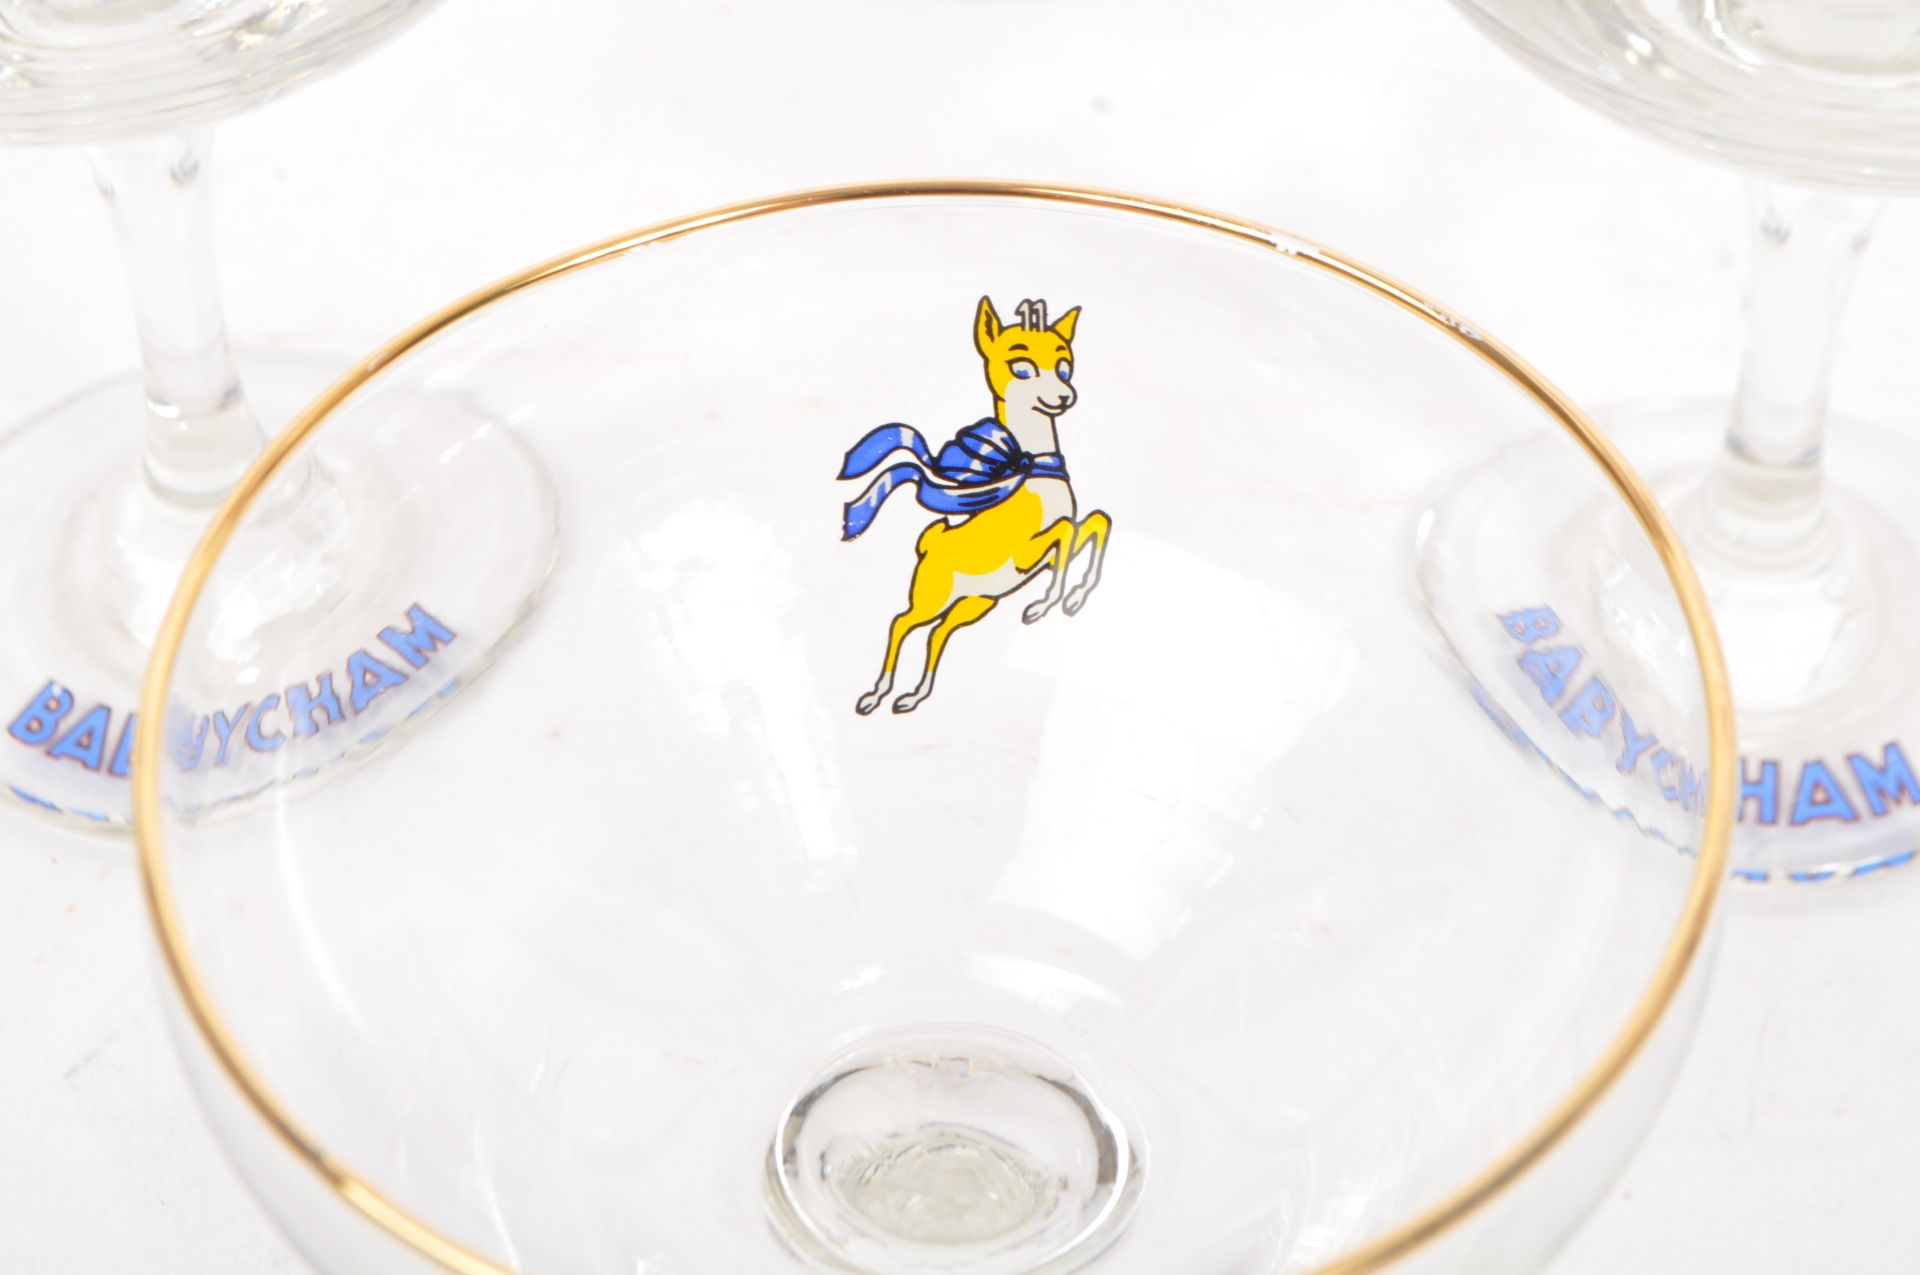 SIX VINTAGE BABYCHAM COCKTAIL COUPE GLASSES - Image 4 of 5